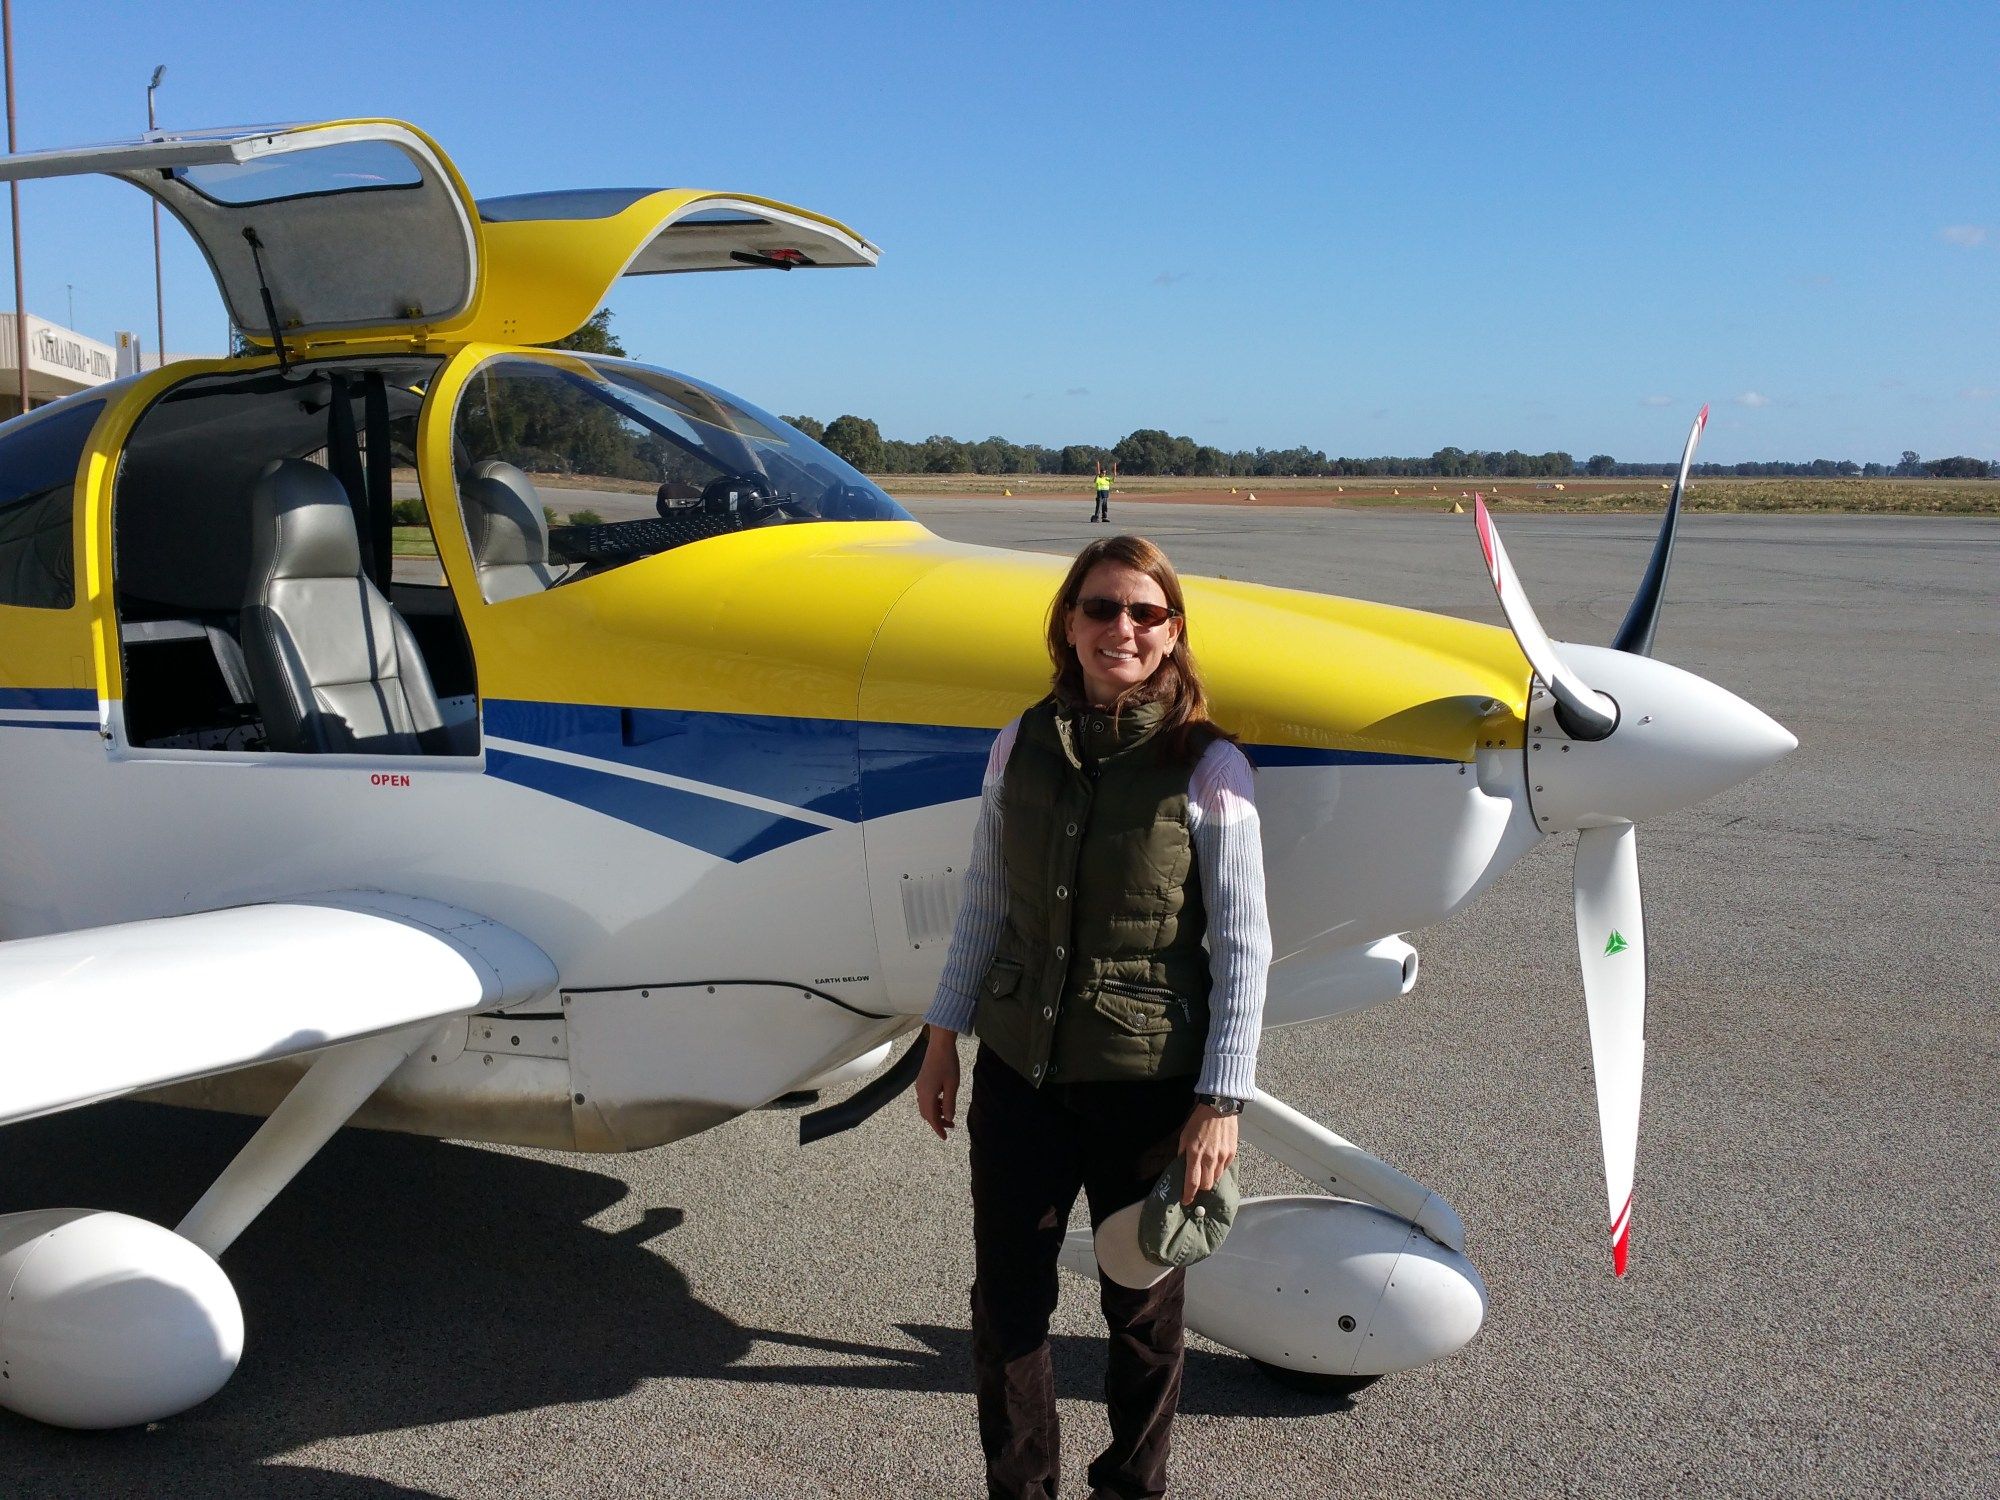 At a Soil Moisture Active Passive (SMAP) campaign in Australia, posing in front of an aircraft that collected measurements in support of the calibration/validation activities. Credit: Erika Podest